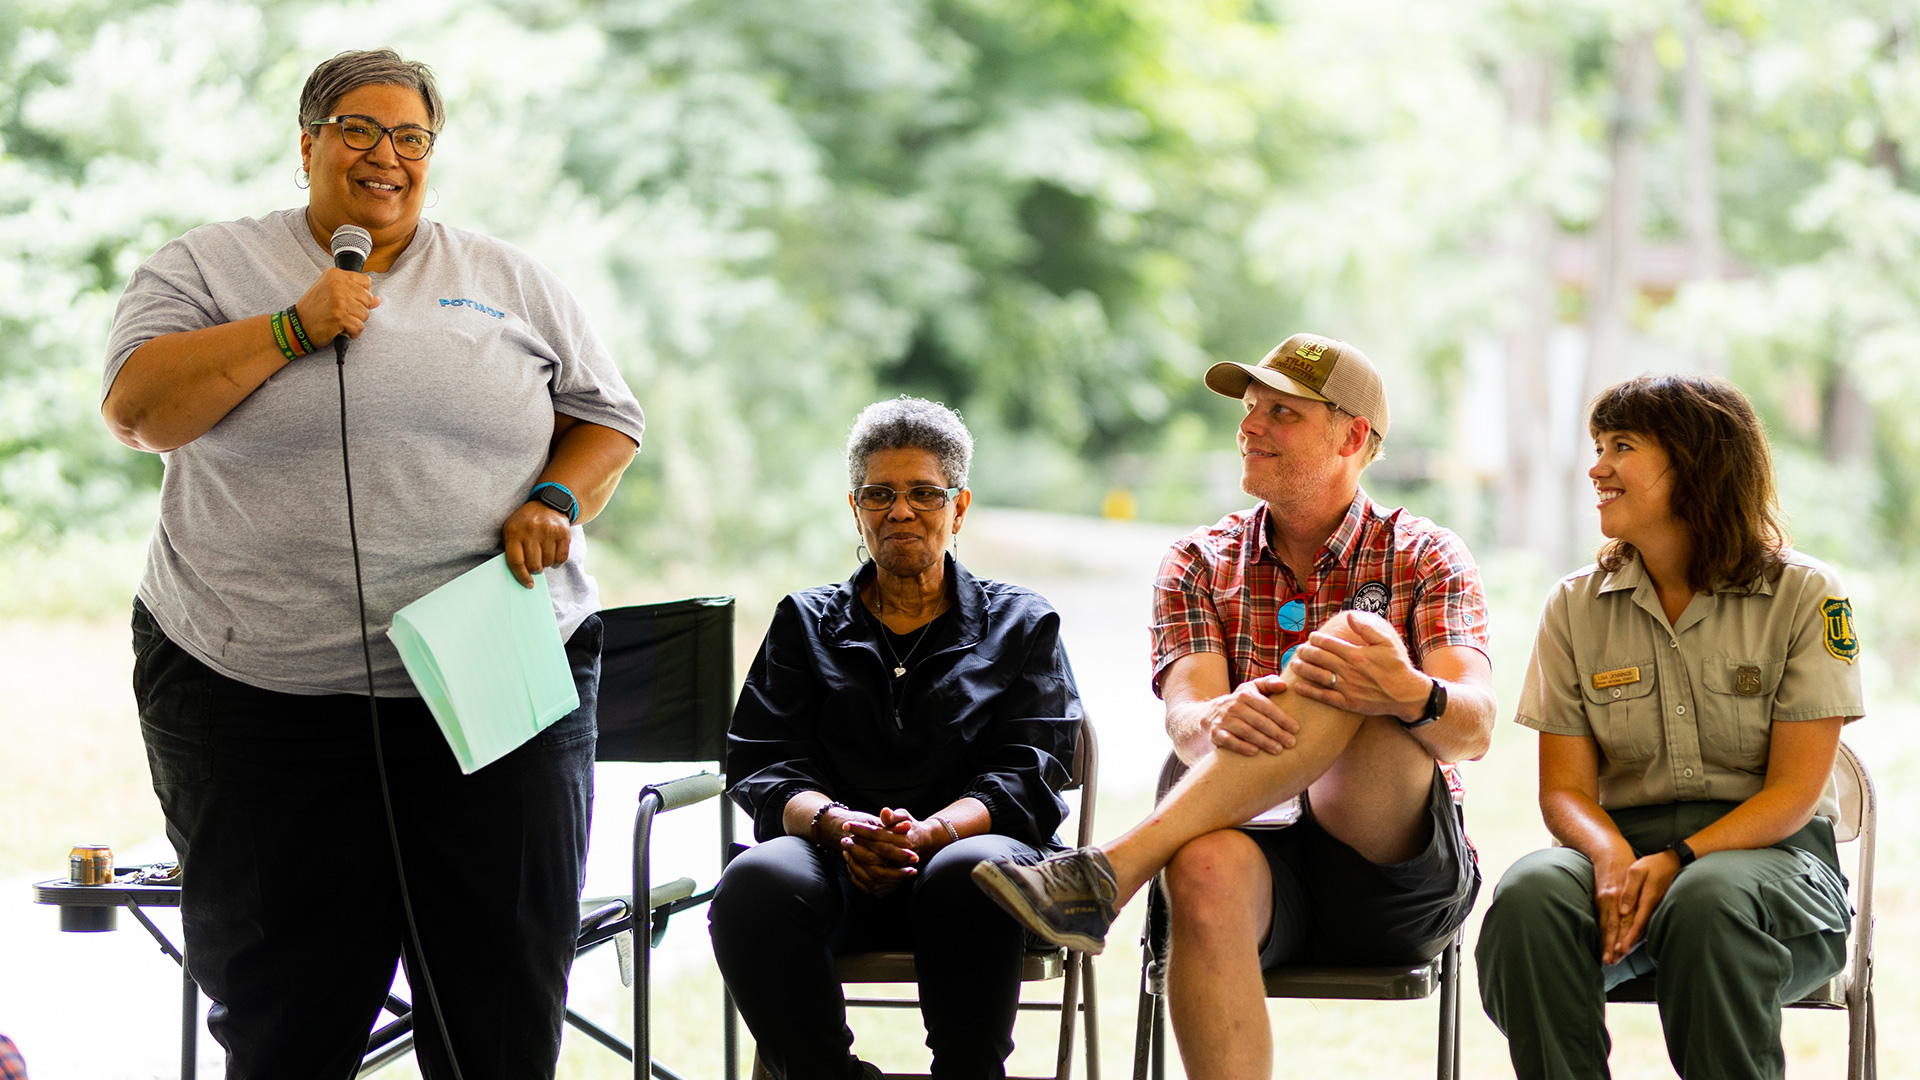 A trail project in the Pisgah National Forest connected a diverse coalition of leaders from Old Fort: Lavita Logan, Stephanie Swepson-Twitty, Jason McDougald and Lisa Jennings. (Photograph by Darrell Cassell)
